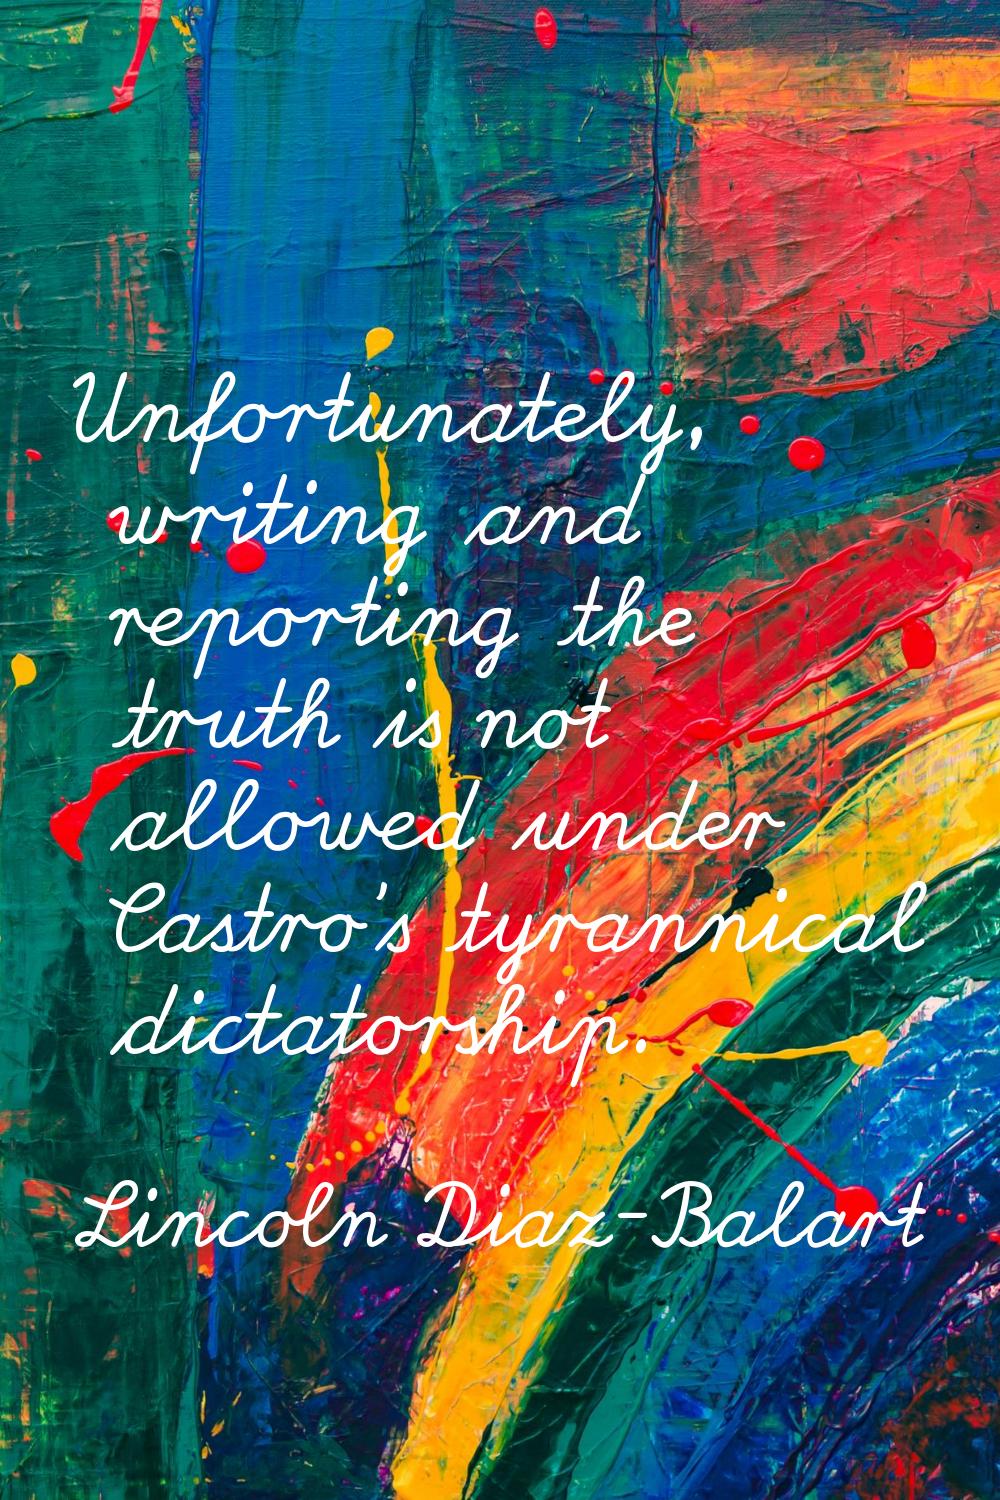 Unfortunately, writing and reporting the truth is not allowed under Castro's tyrannical dictatorshi